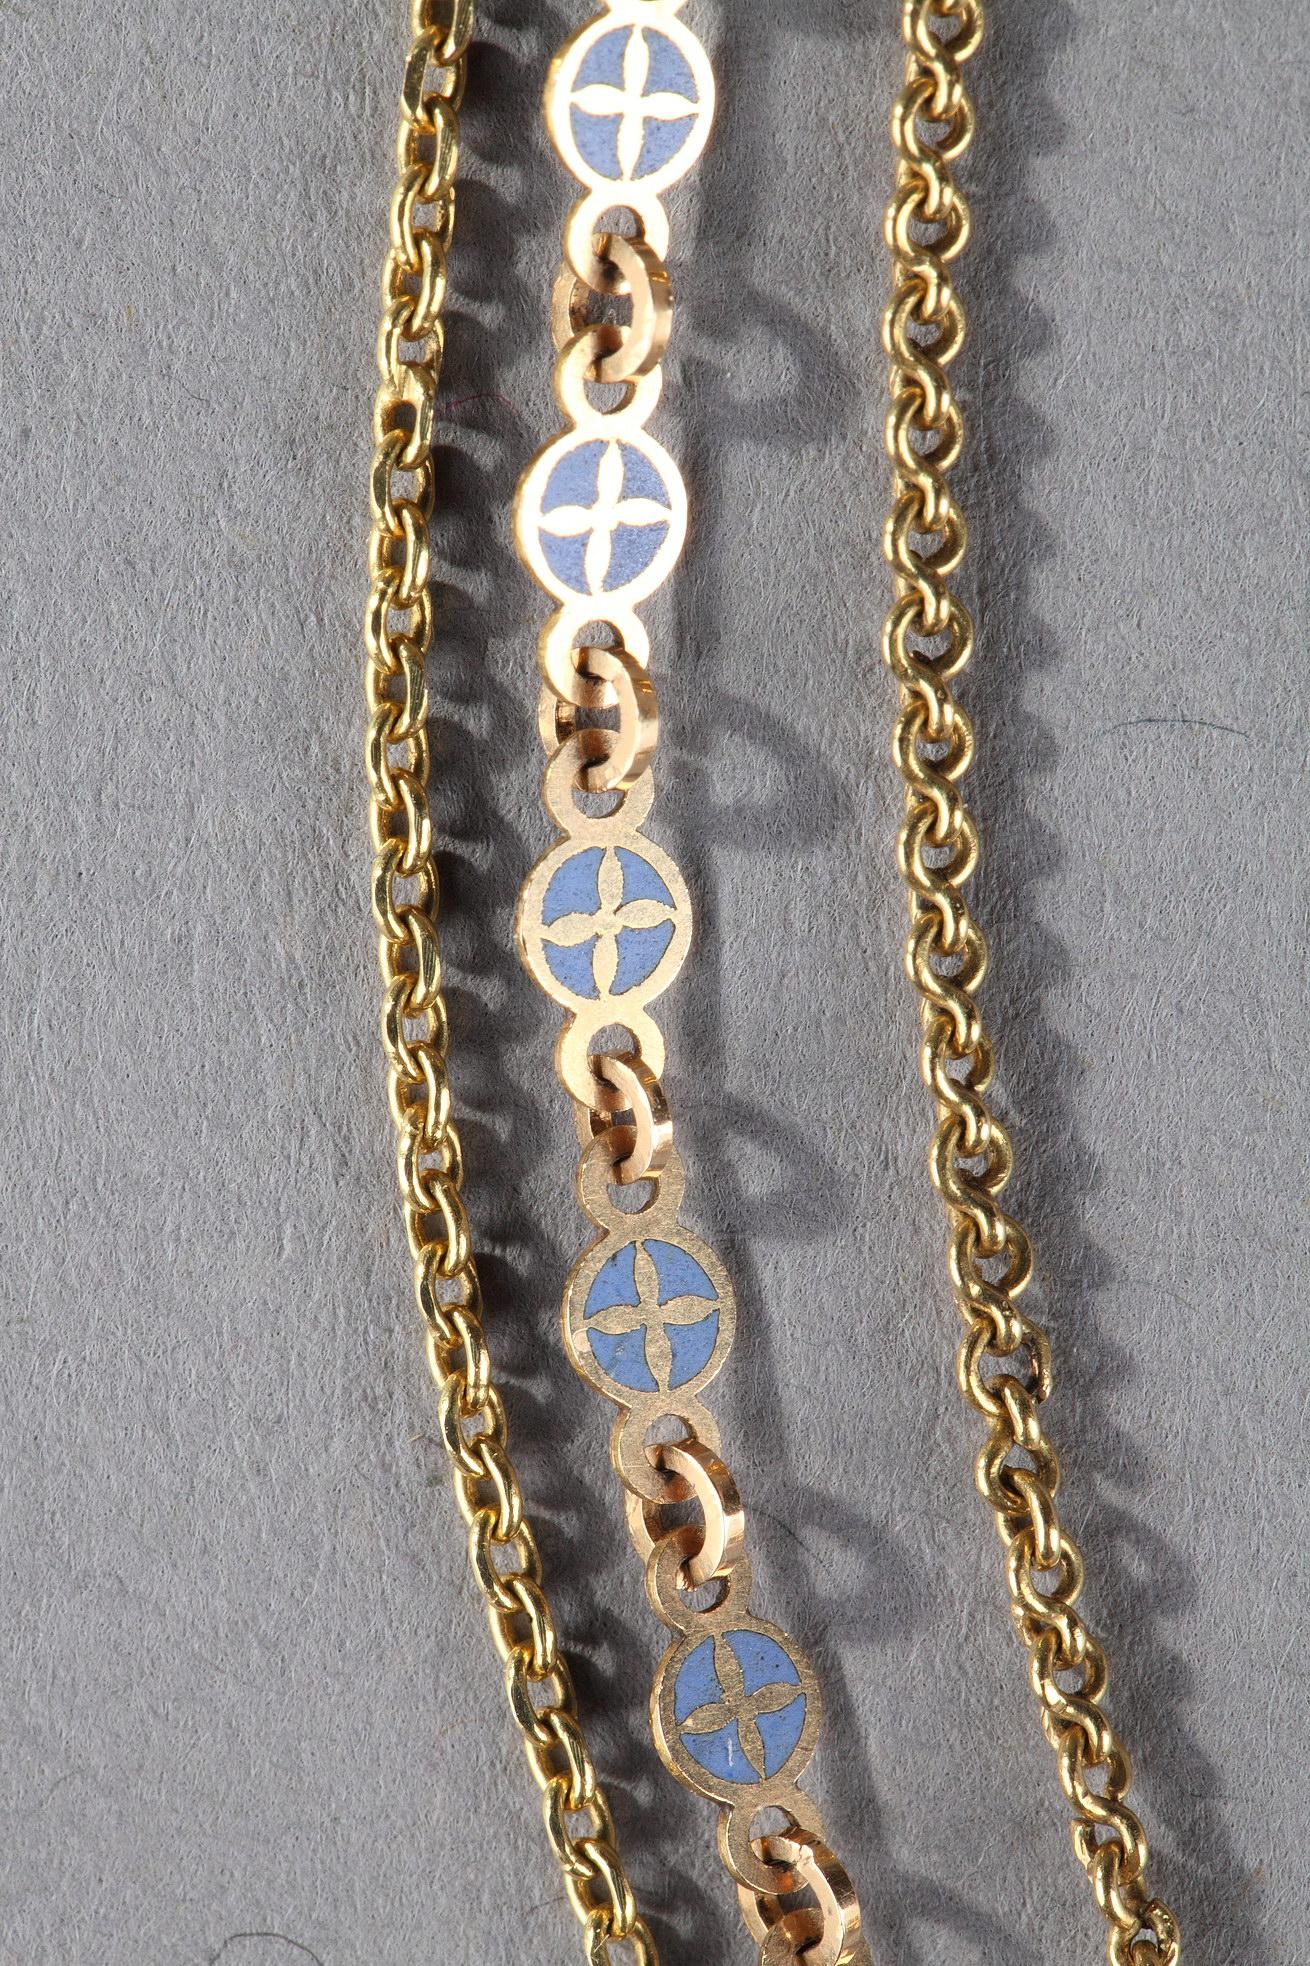 Chain Link Necklace with Gold and Enamel Plates, Early 19th Century In Good Condition For Sale In Paris, FR